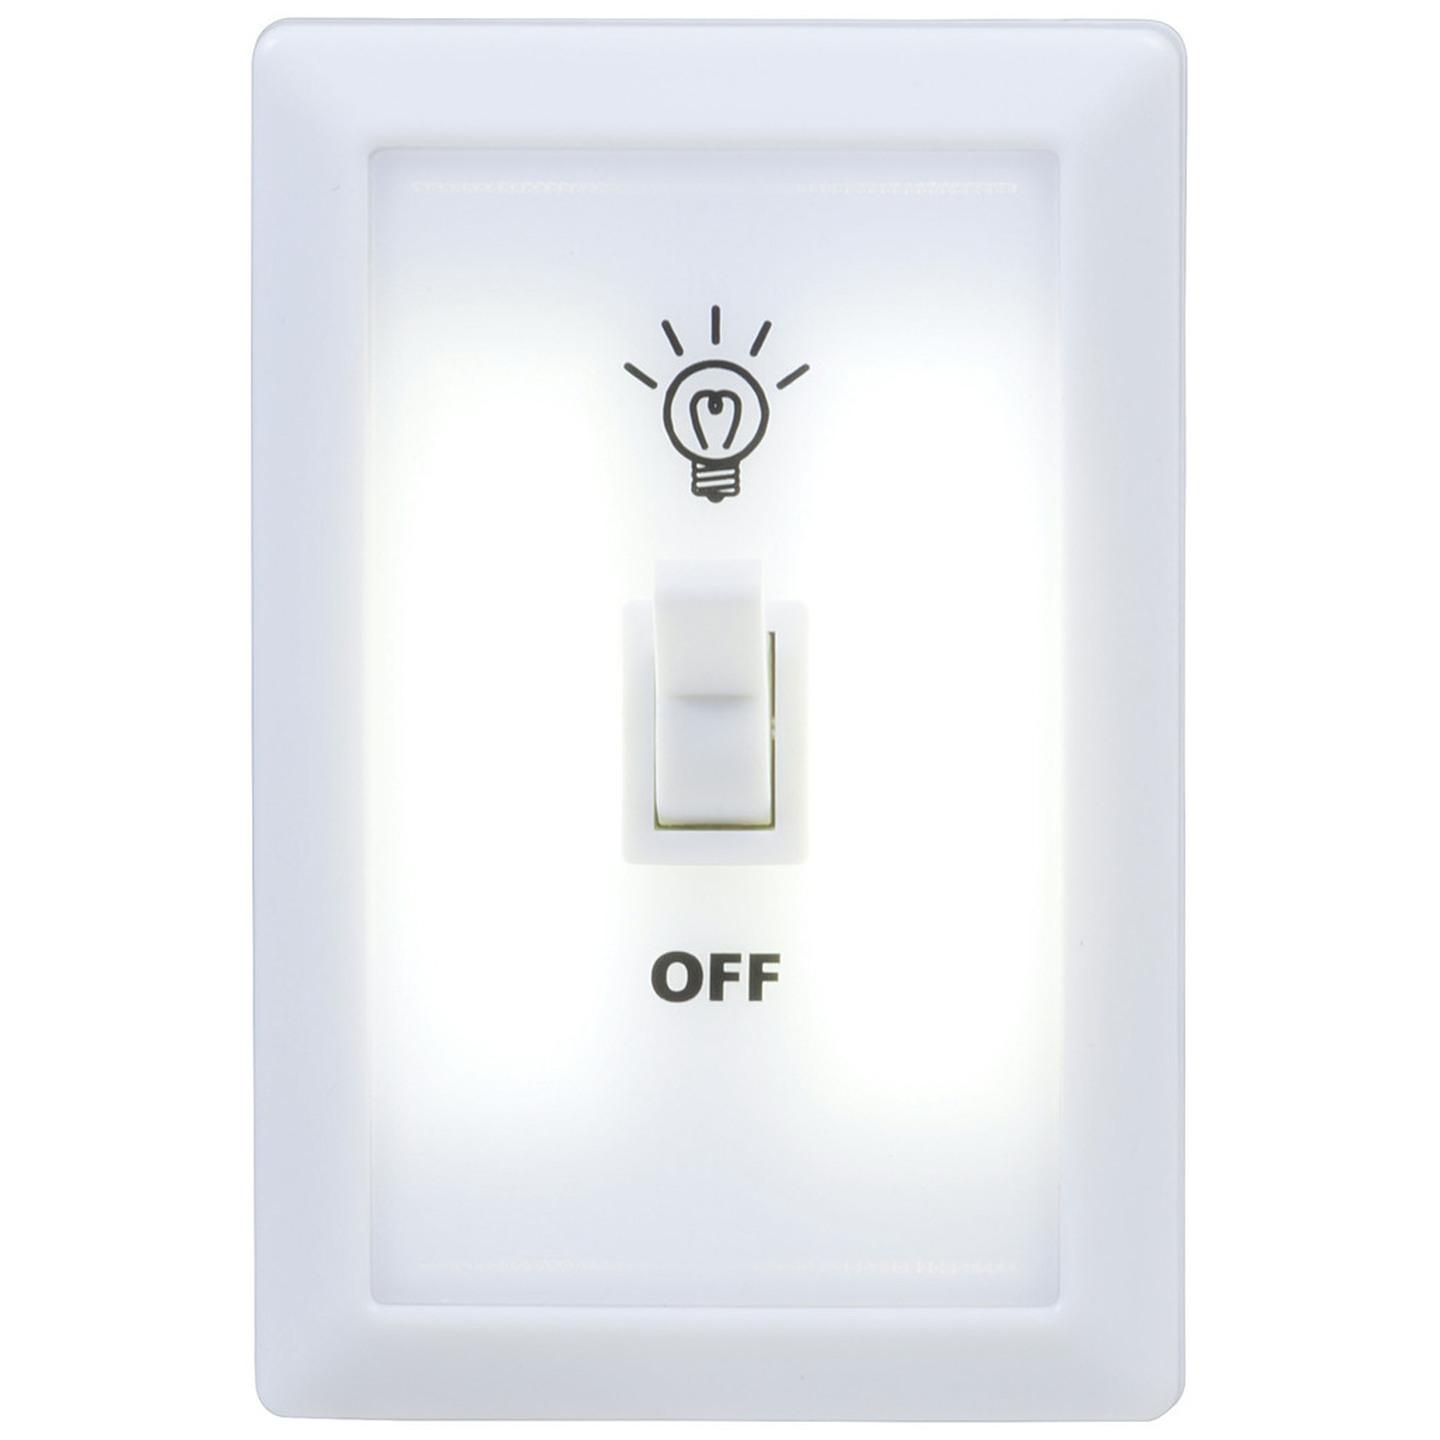 Wall Mount Easy Switch LED Light